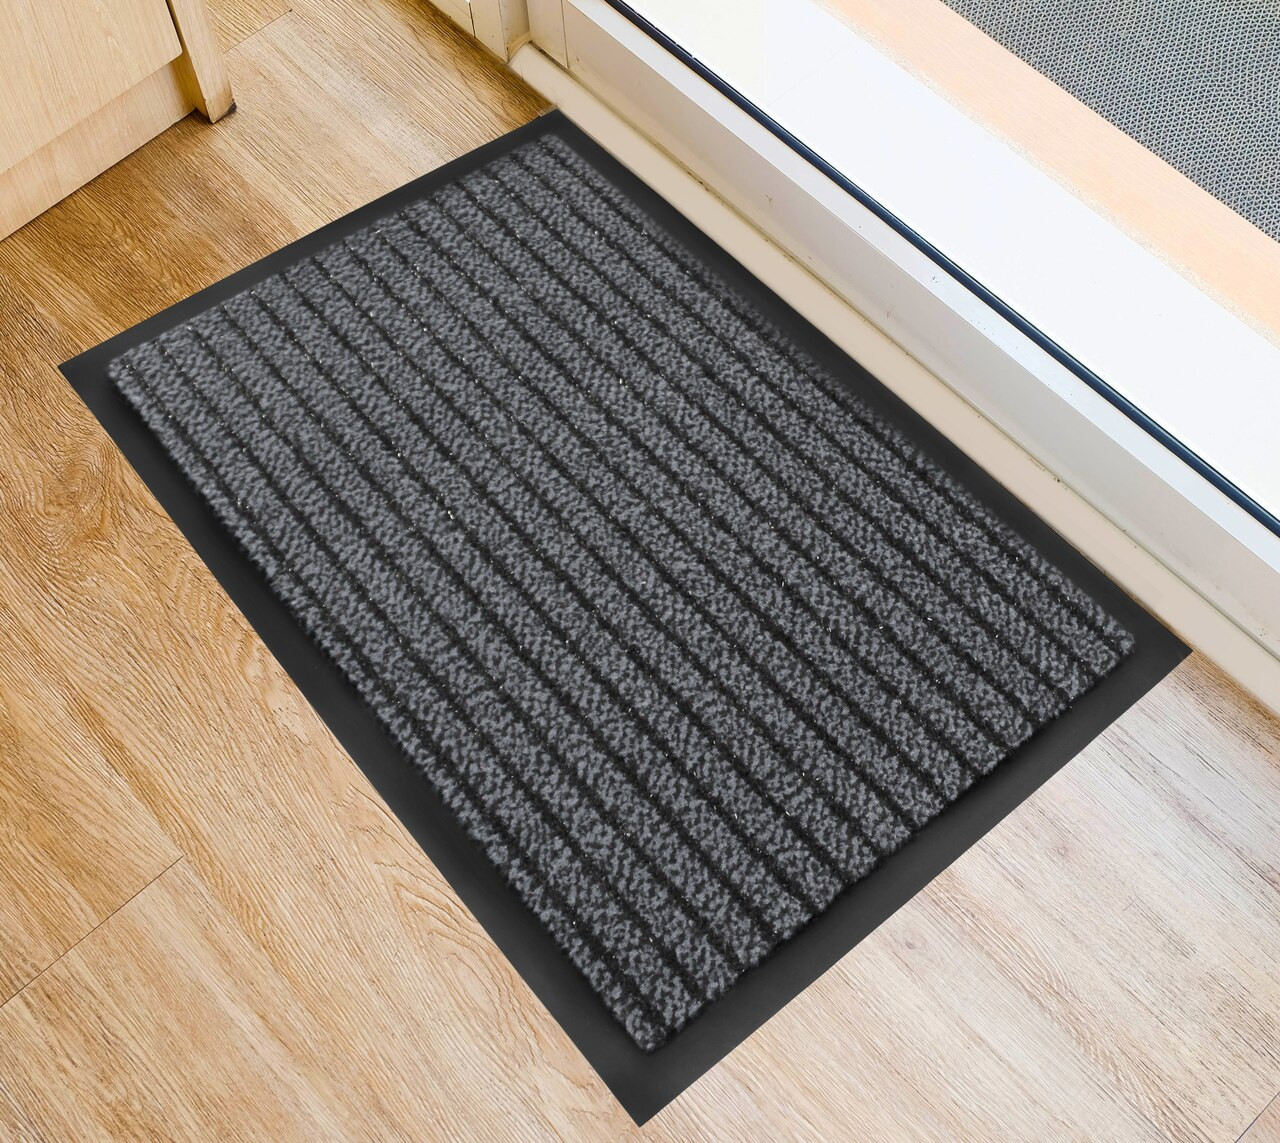 https://cdn11.bigcommerce.com/s-fjwps1jbkv/images/stencil/1280x1280/products/150/2909/ultralux-scraper-entrance-mat-or-polypropylene-fibers-and-anti-slip-vinyl-backed-indoor-entry-rug-doormat-or-gray__76080.1688986841.jpg?c=2?imbypass=on